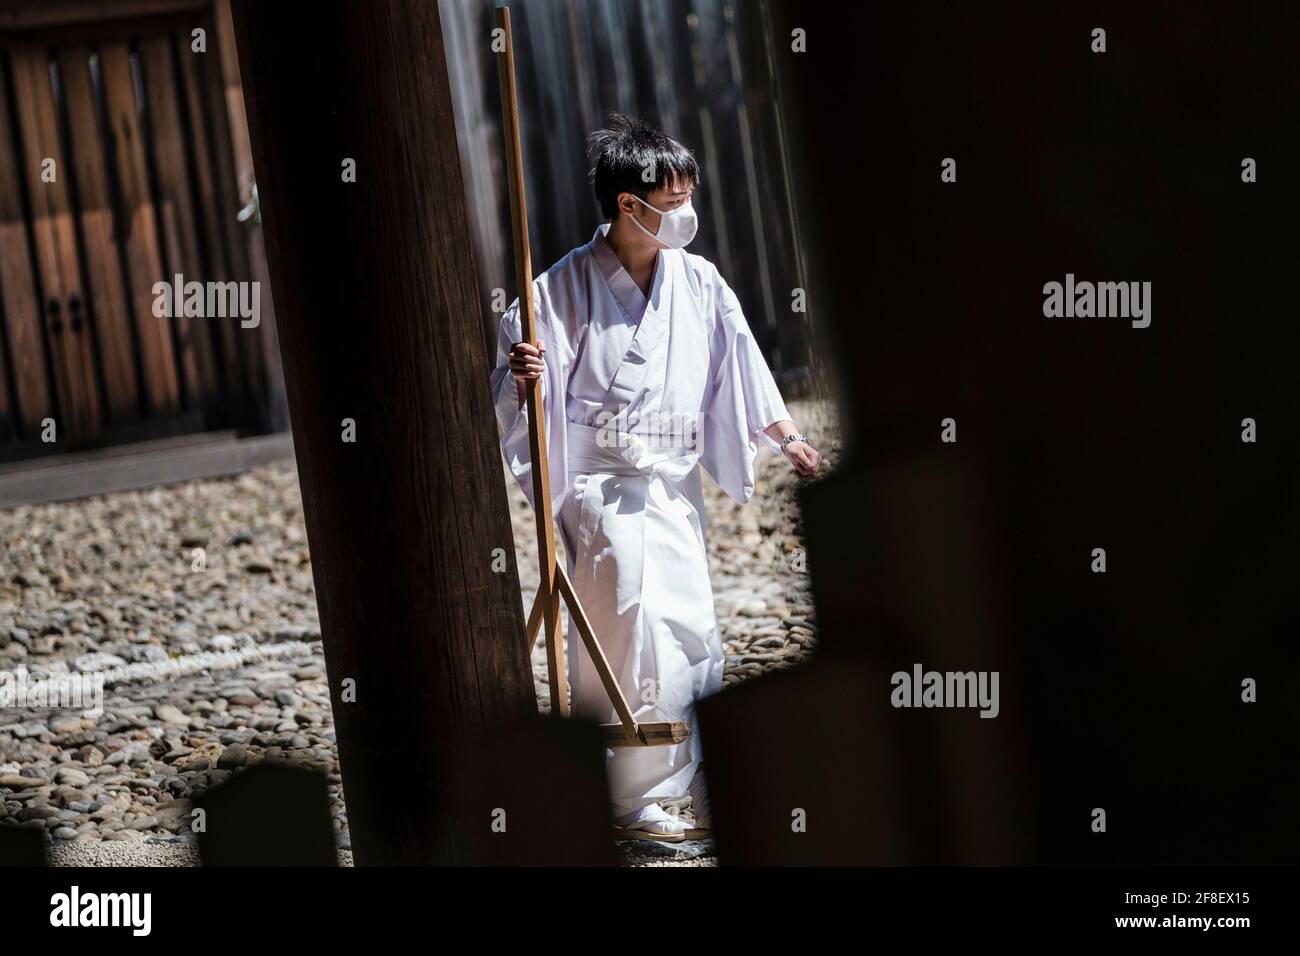 APRIL 14, 2021 - A shinto priest is seen wearing a mask to prevent the spread of coronavirus at Atsuta Jingu, a major shrine in Nagoya, Aichi Prefecture, Japan. The government of Aichi prefecture plans to ask the central Japanese government for quasi-emergency measures to be implemented, as the prefecture is experiencing a spike in the number of daily new coronavirus cases. With 100 days to go until the Olympics, regions around the country are seeing an uptick in Covid-19 cases. Credit: Ben Weller/AFLO/Alamy Live News Stock Photo